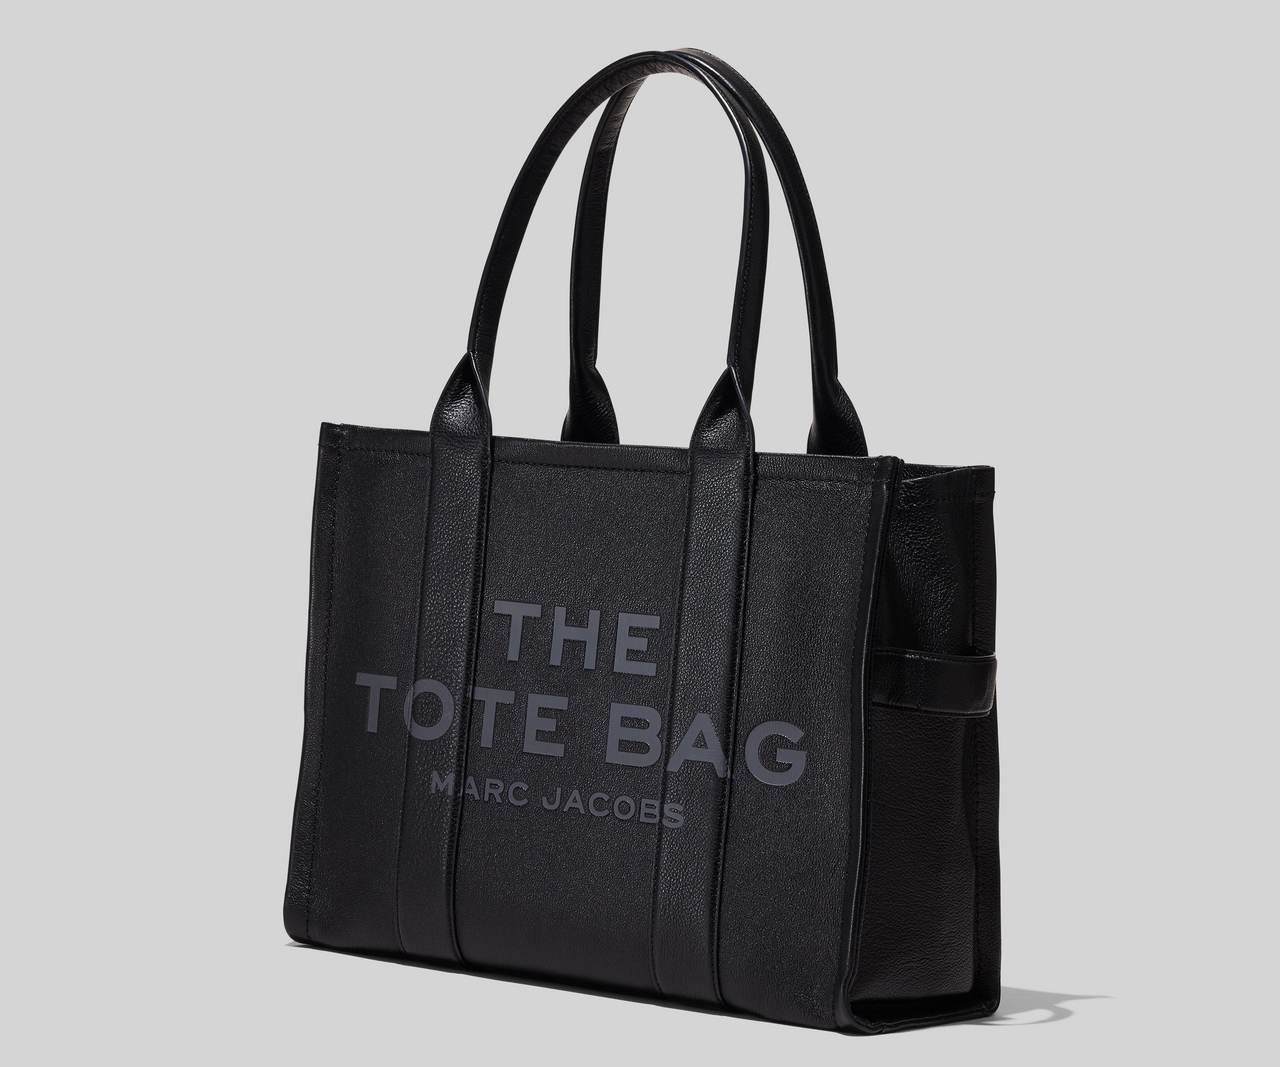 Marc Jacobs + The Leather Tote Bag